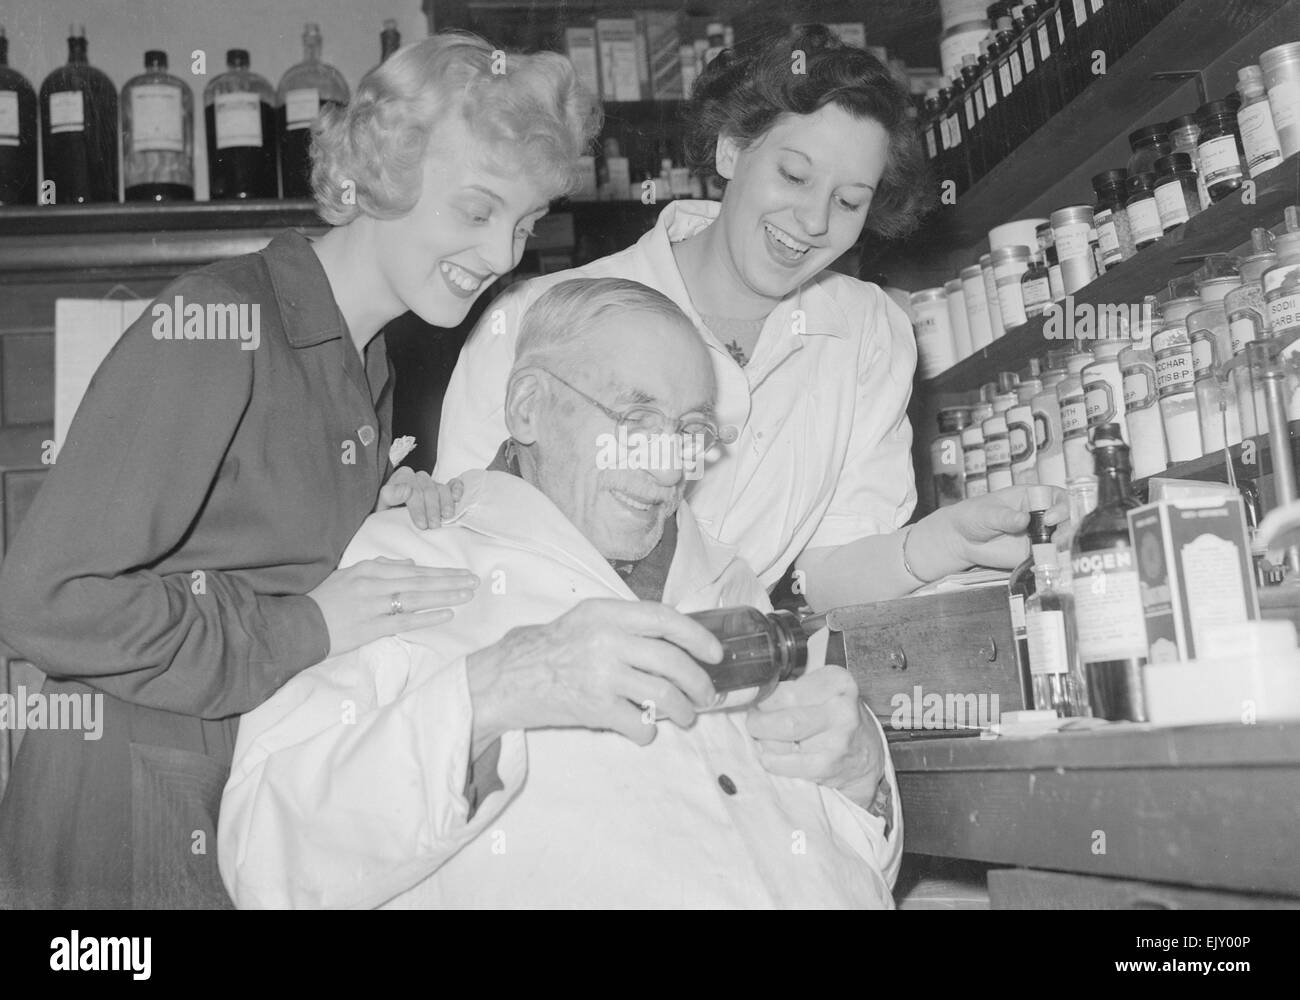 Mr Arthur Lawson 94 year old chemist seen here at work with his assistants at his dispensary. 1st June 1952 Stock Photo